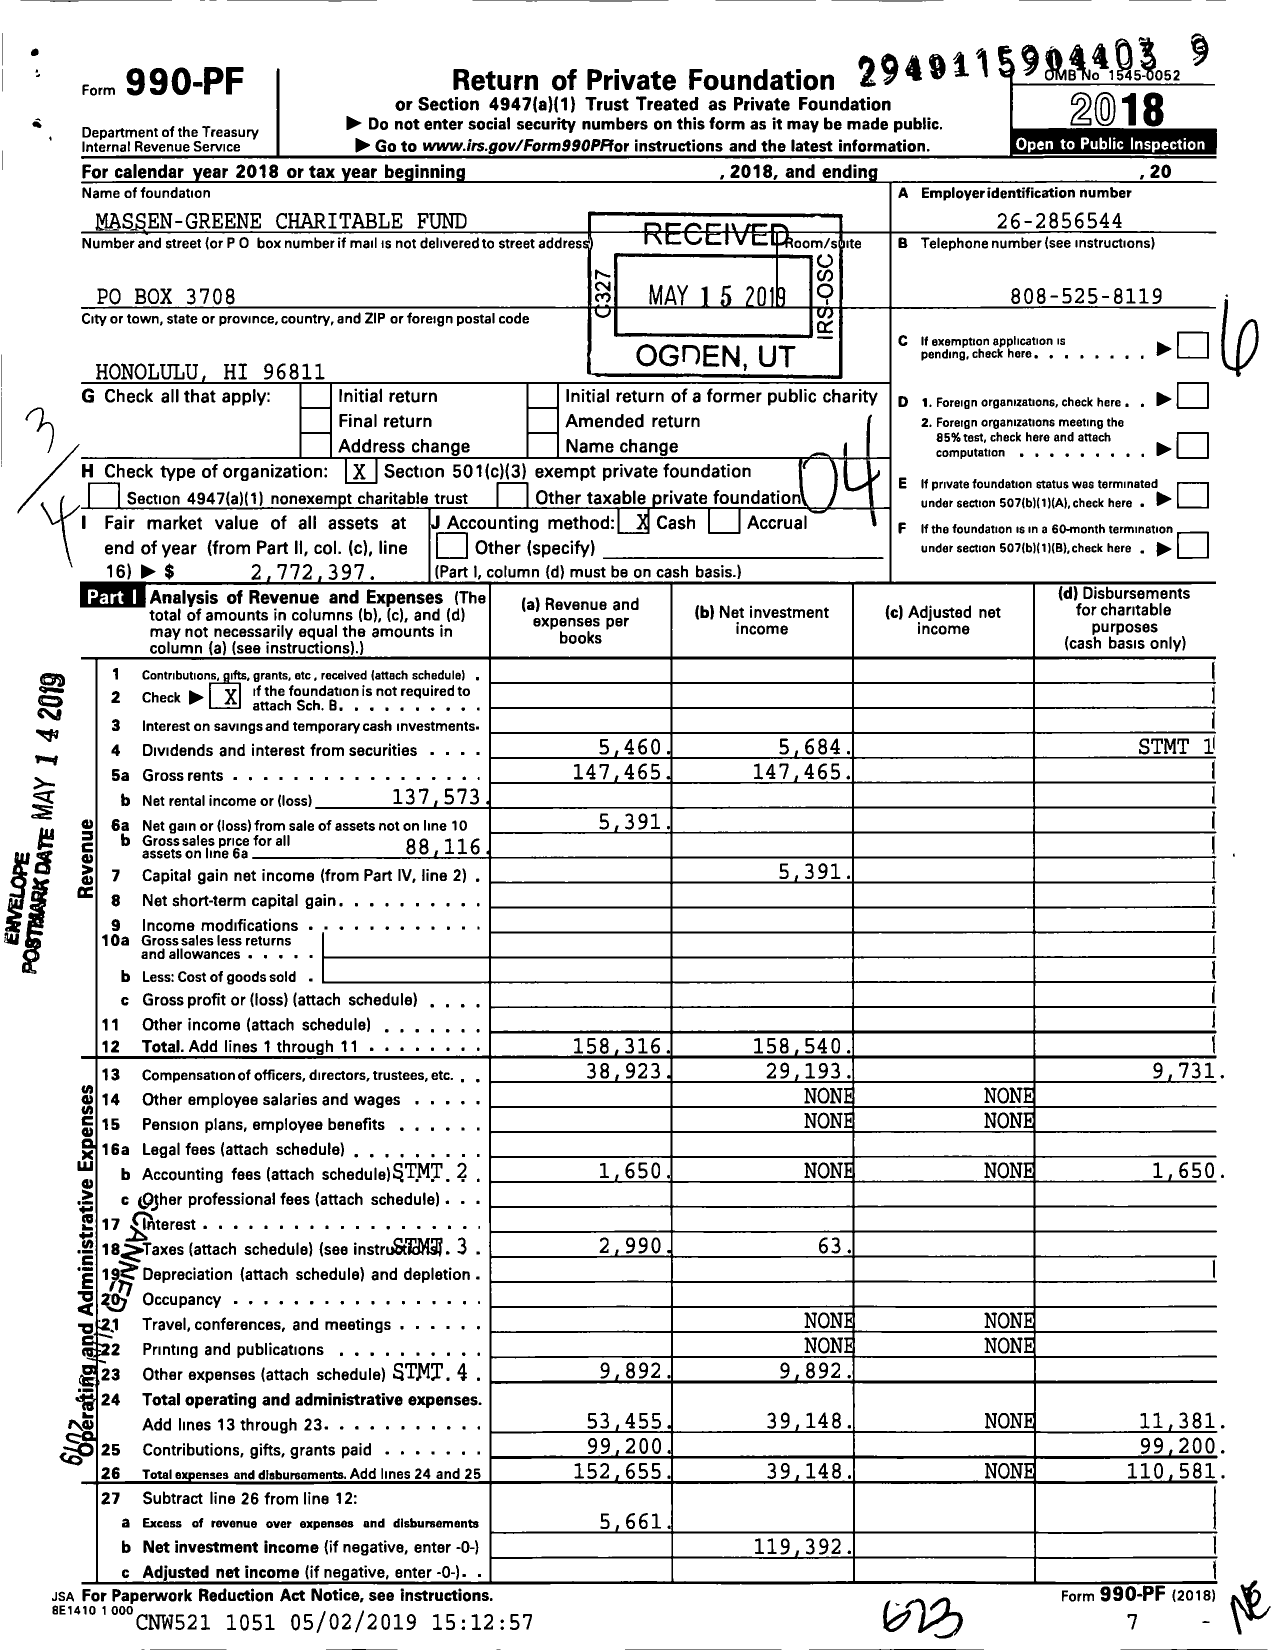 Image of first page of 2018 Form 990PF for Massen-Greene Charitable Fund